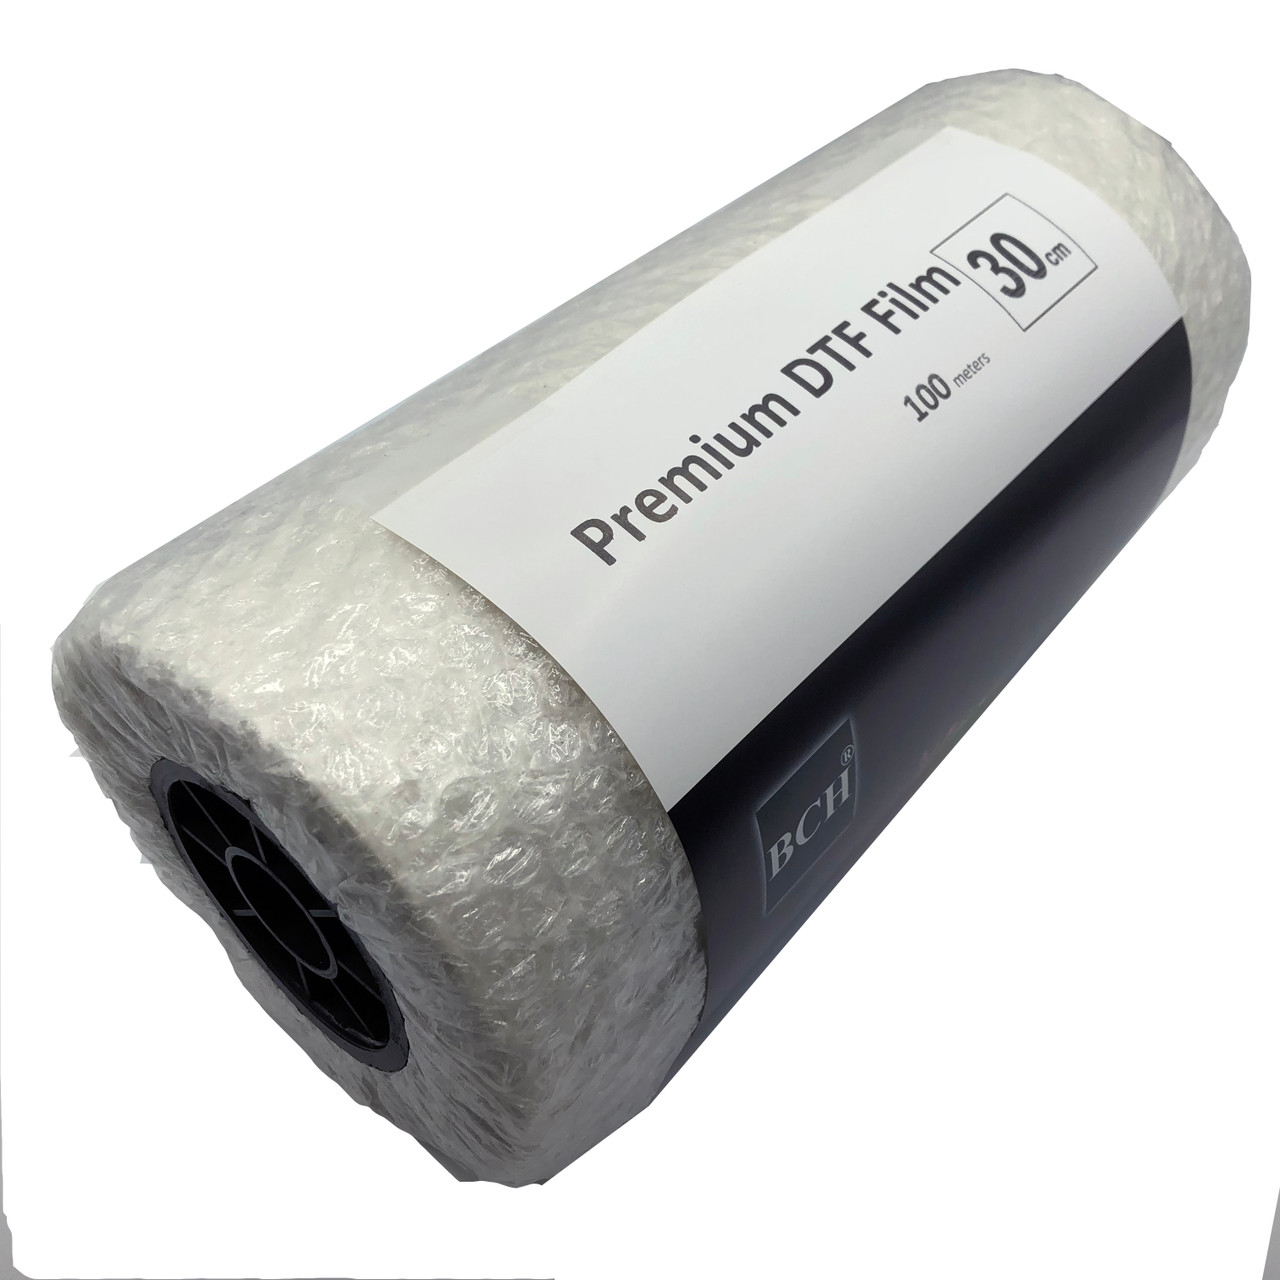 Premium DTF Direct-to-Film Transfer Film - 100 Sheets Bulk Package - Cold &  Hot Peel - Size: A4 (8.5 x 11.75 or 210 mm x 297 mm)